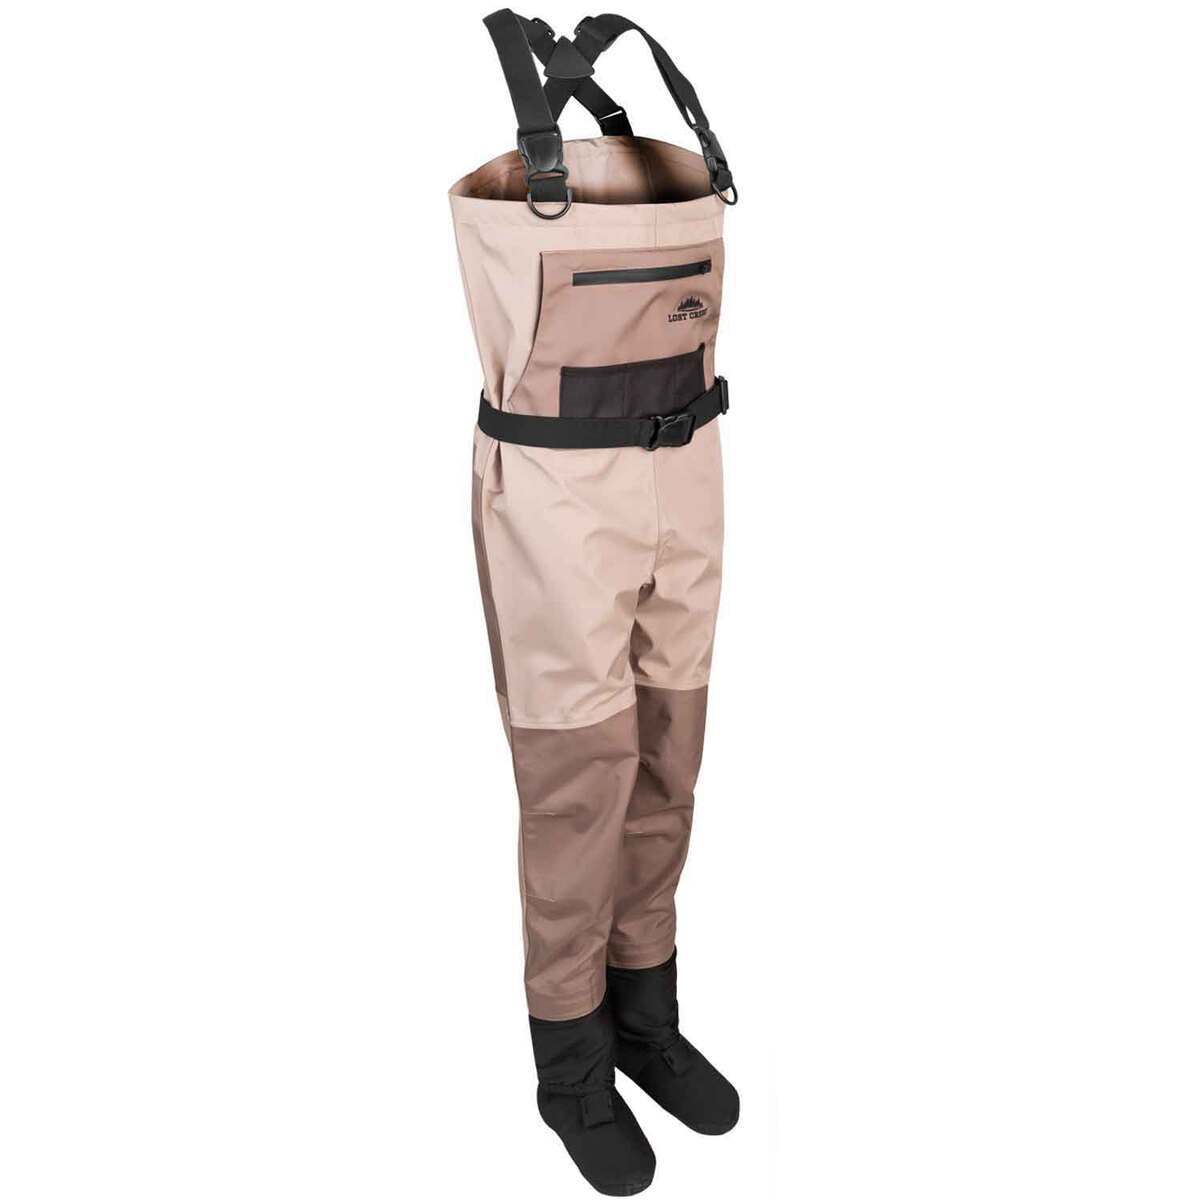 Fly Fishing Waders And Shoes Set: Breathable Fishing Waders With Felt Sole,  Aqua Sports Waders For Men And Women From Kua09, $147.74